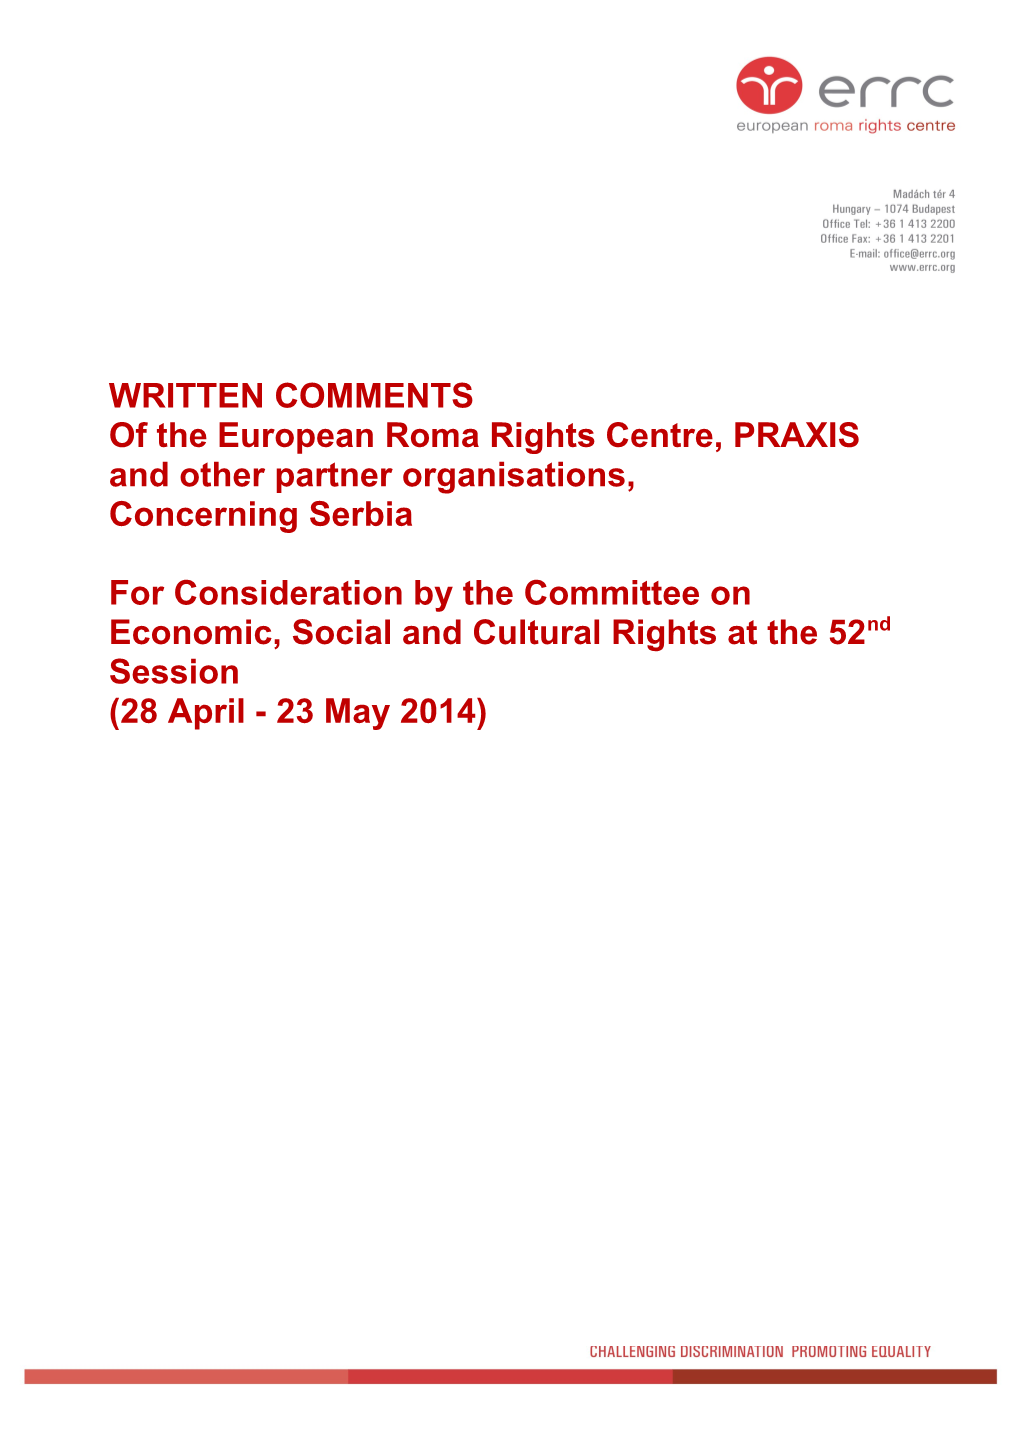 Of the European Roma Rights Centre, PRAXIS and Other Partner Organisations